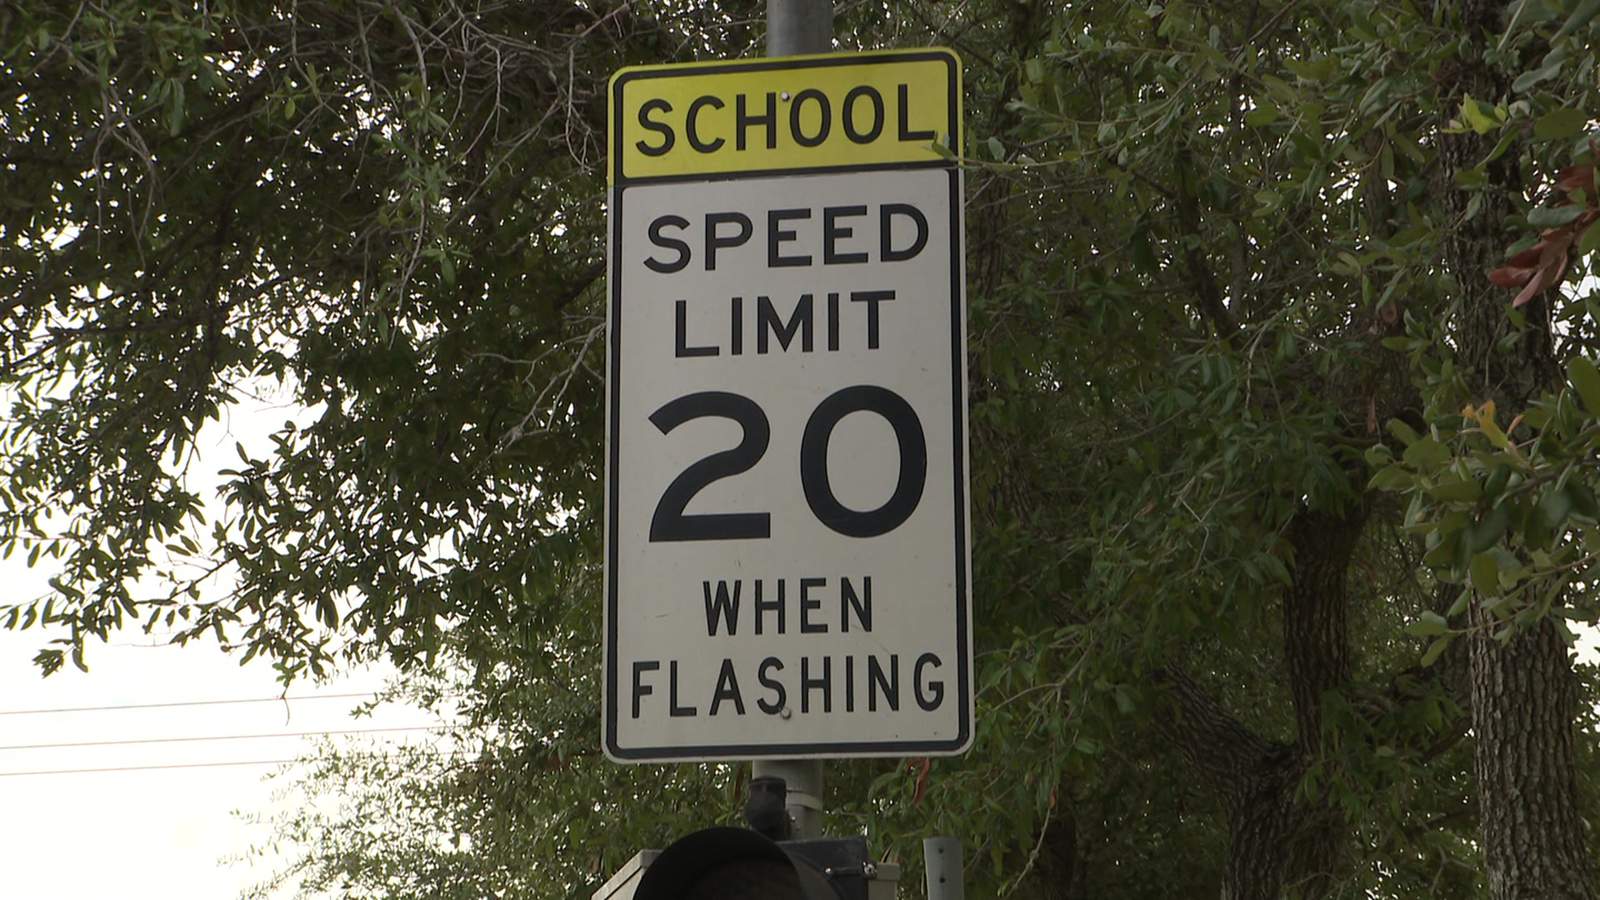 Here’s why officials say you should stick to observing school zone laws despite online classes